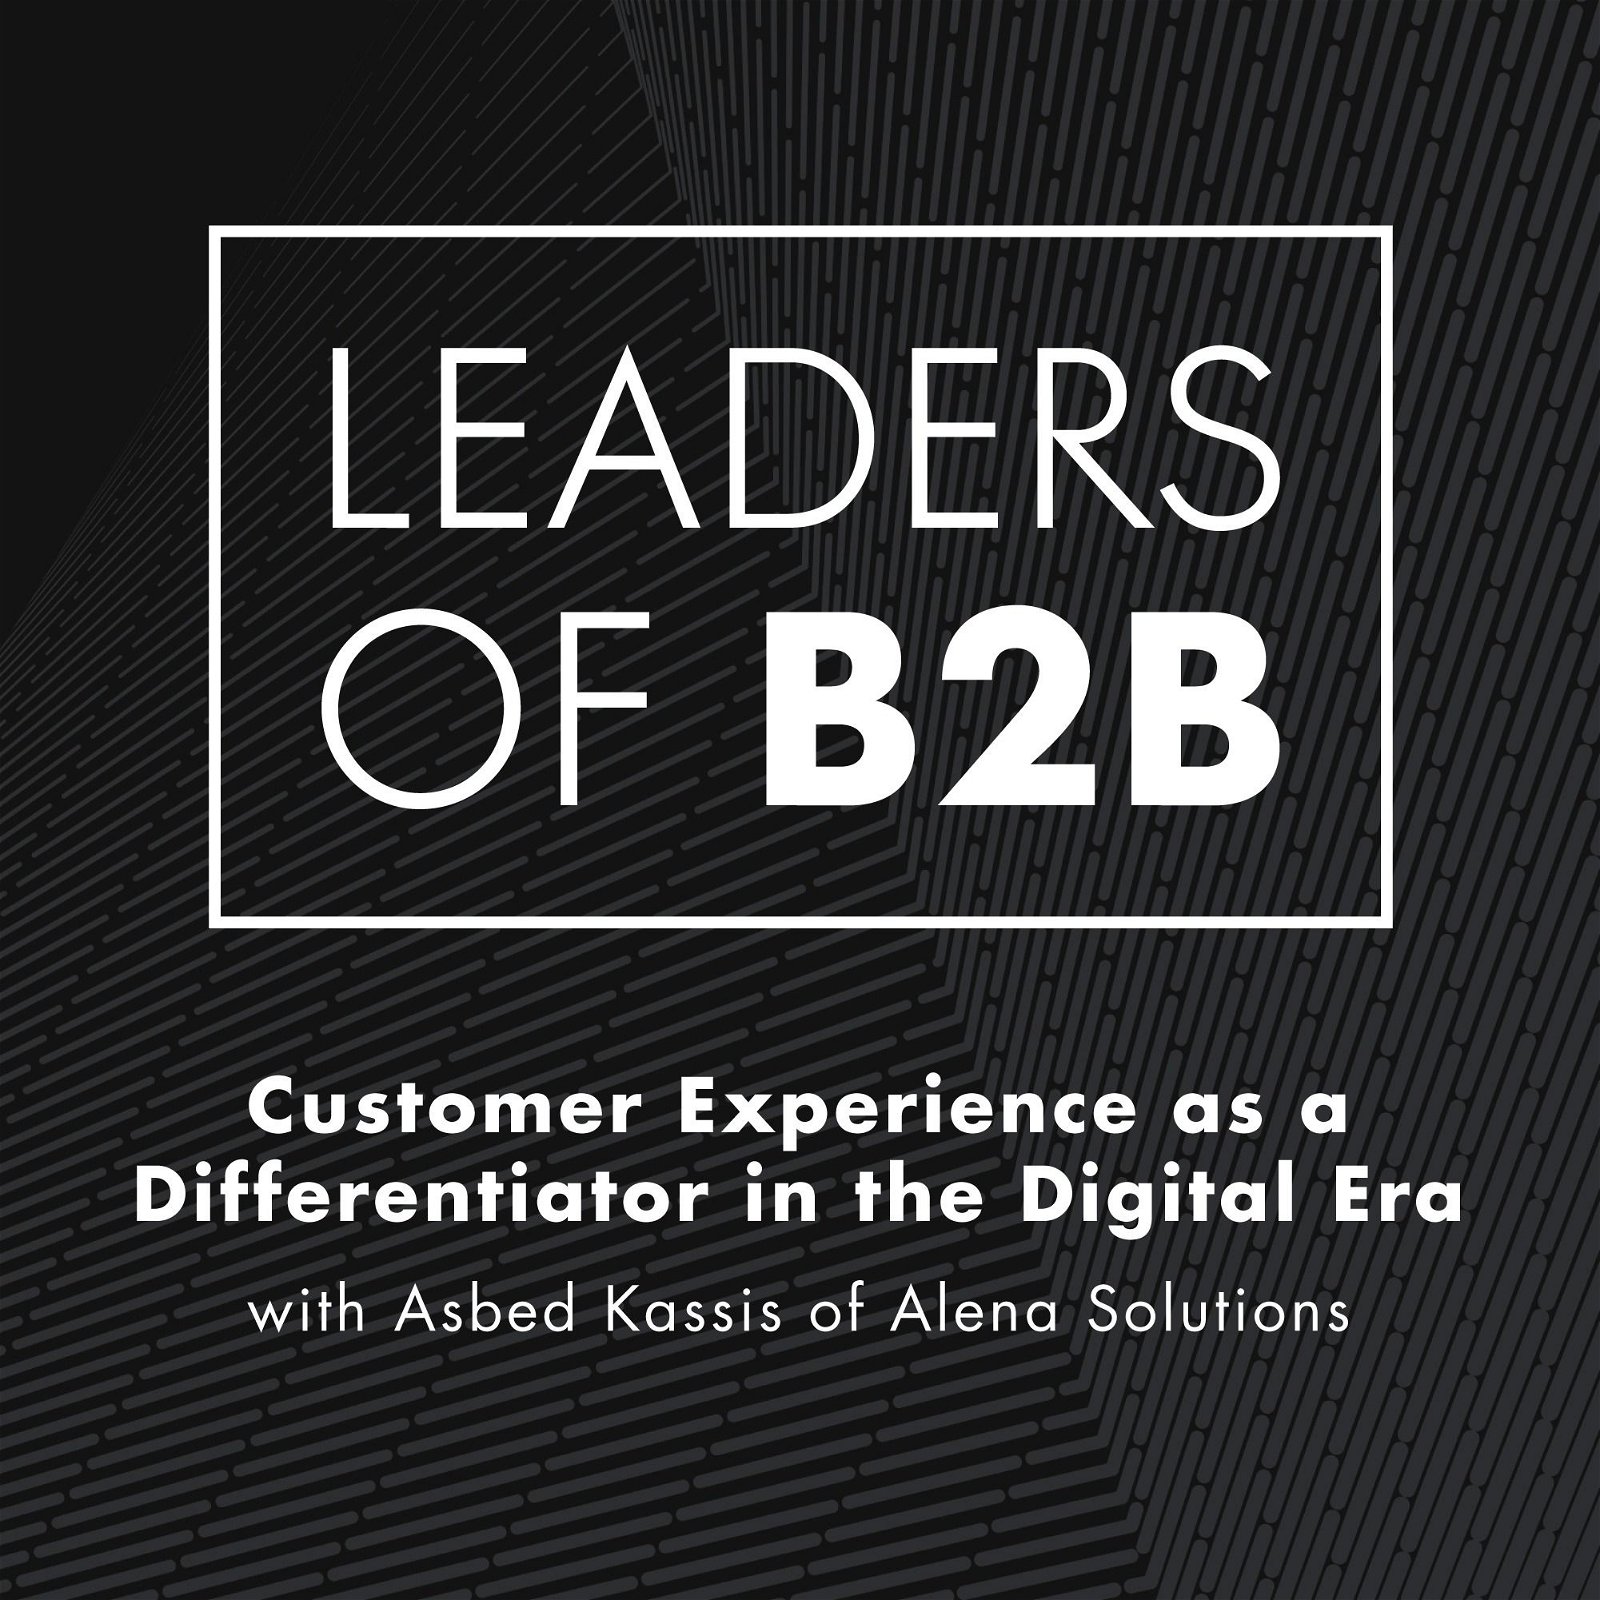 Customer Experience as a Differentiator in the Digital Era with Asbed Kassis of Alena Solutions